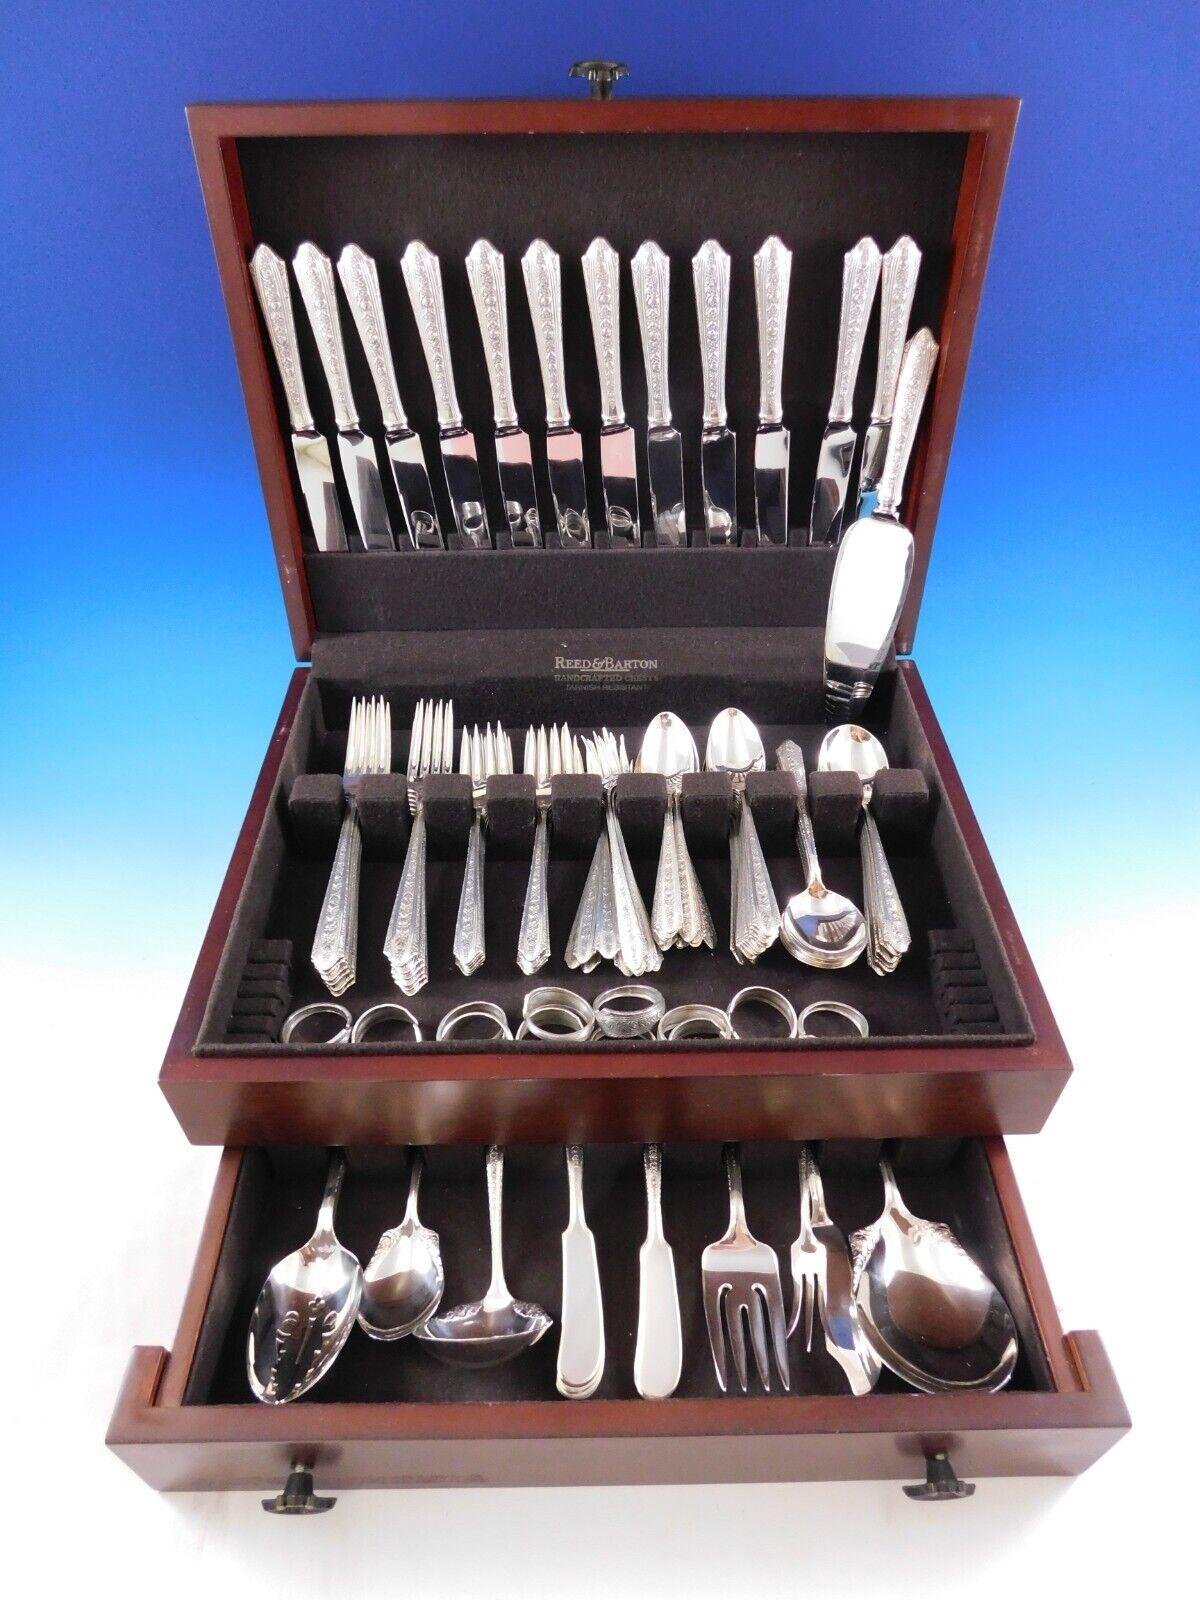 Large Normandie by Wallace Silver Flatware set with rose and daisy design, 117 pieces. This set includes:

12 Knives, 8 1/2